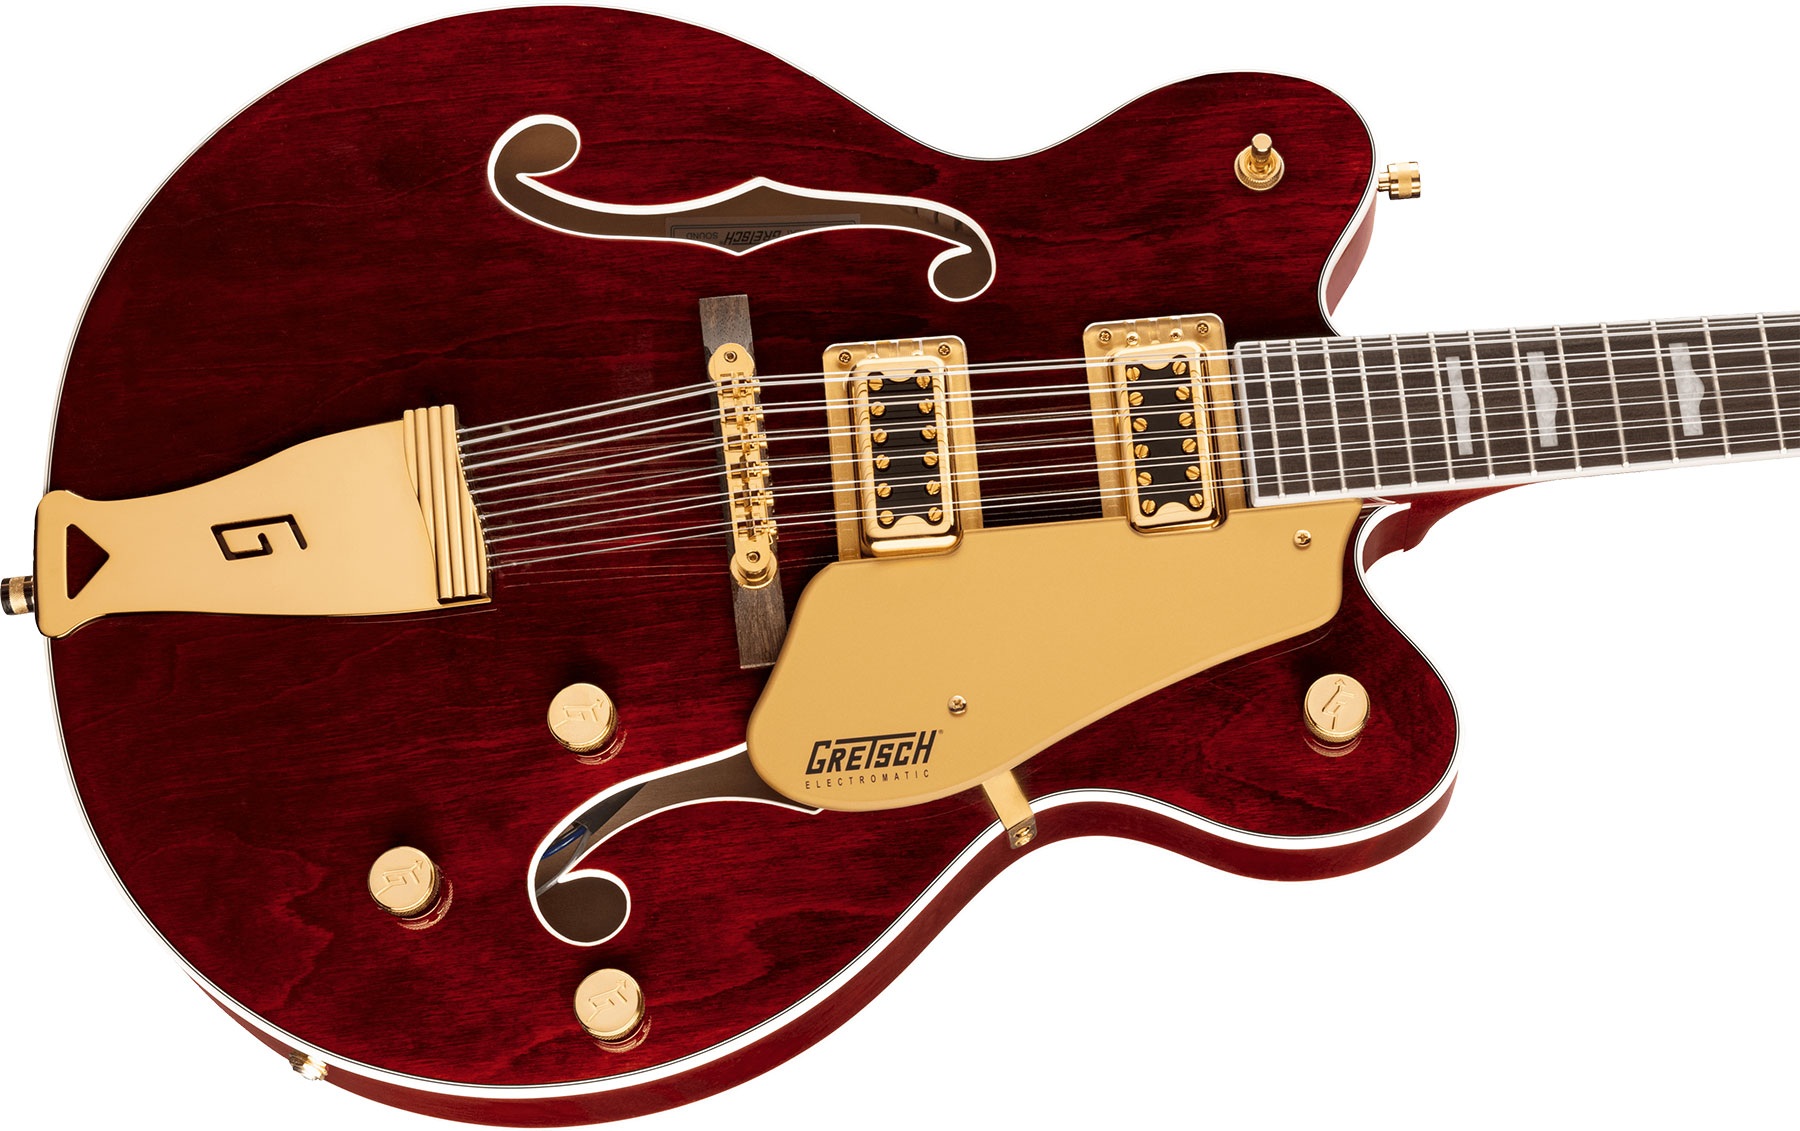 Gretsch G5422tg-12 Electromatic Classic Hollow Body Dc 12c Hh Ht Lau - Walnut Stain - Semi-hollow electric guitar - Variation 2